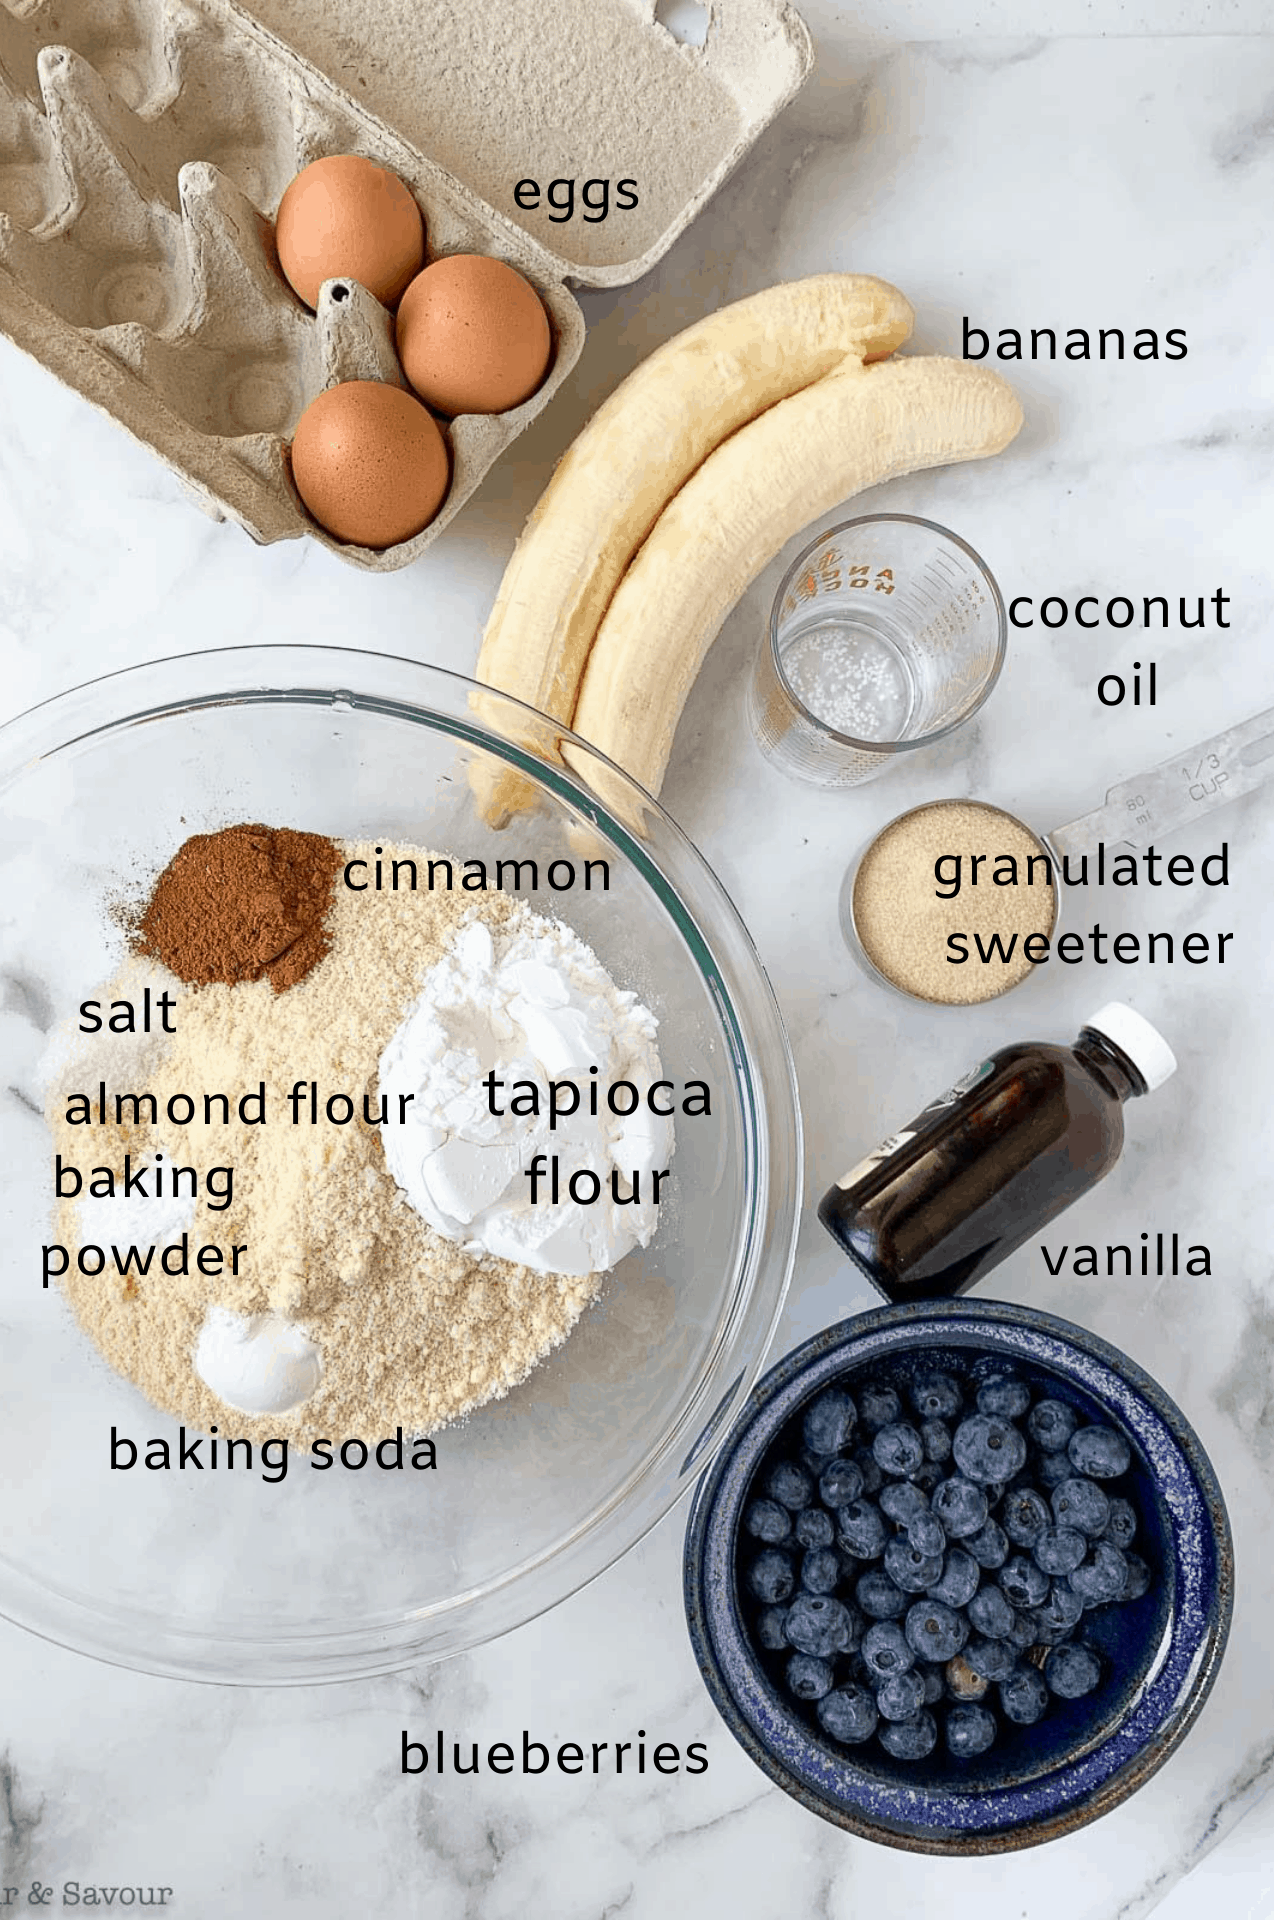 Ingredients for Blueberry Banana Bread